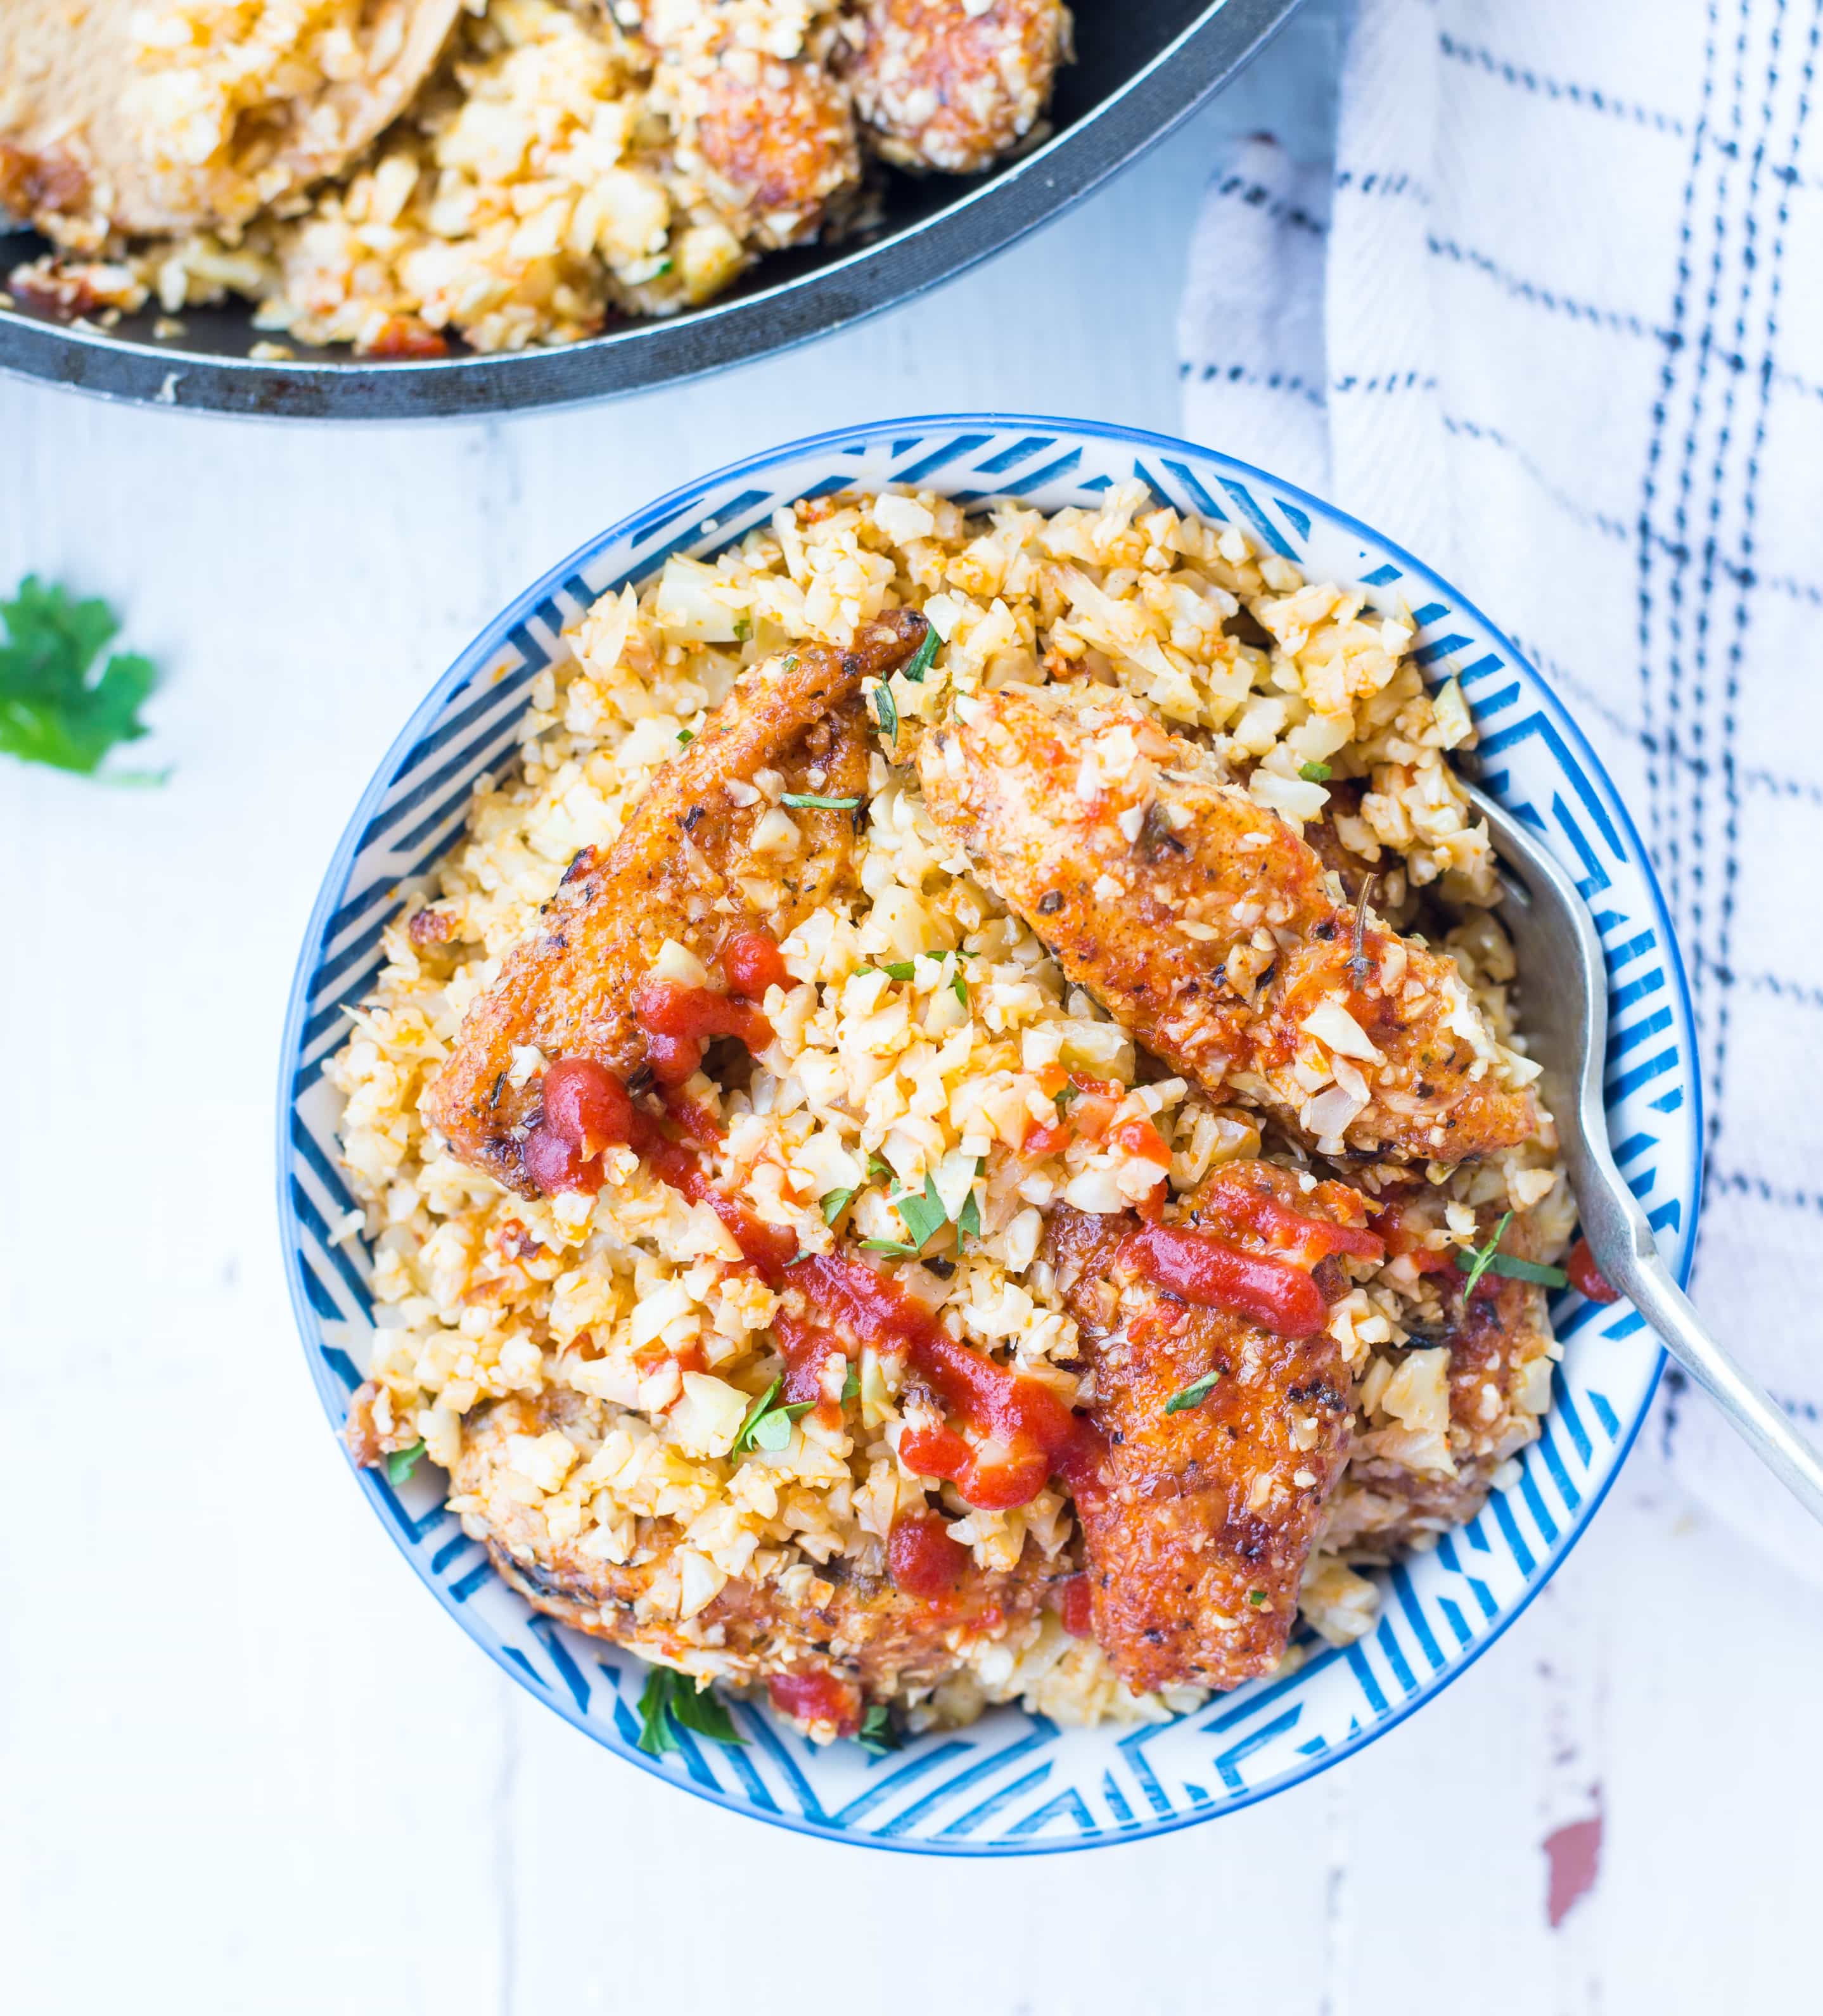 LOW CARB CHICKEN CAULIFLOWER RICE - The flavours of kitchen